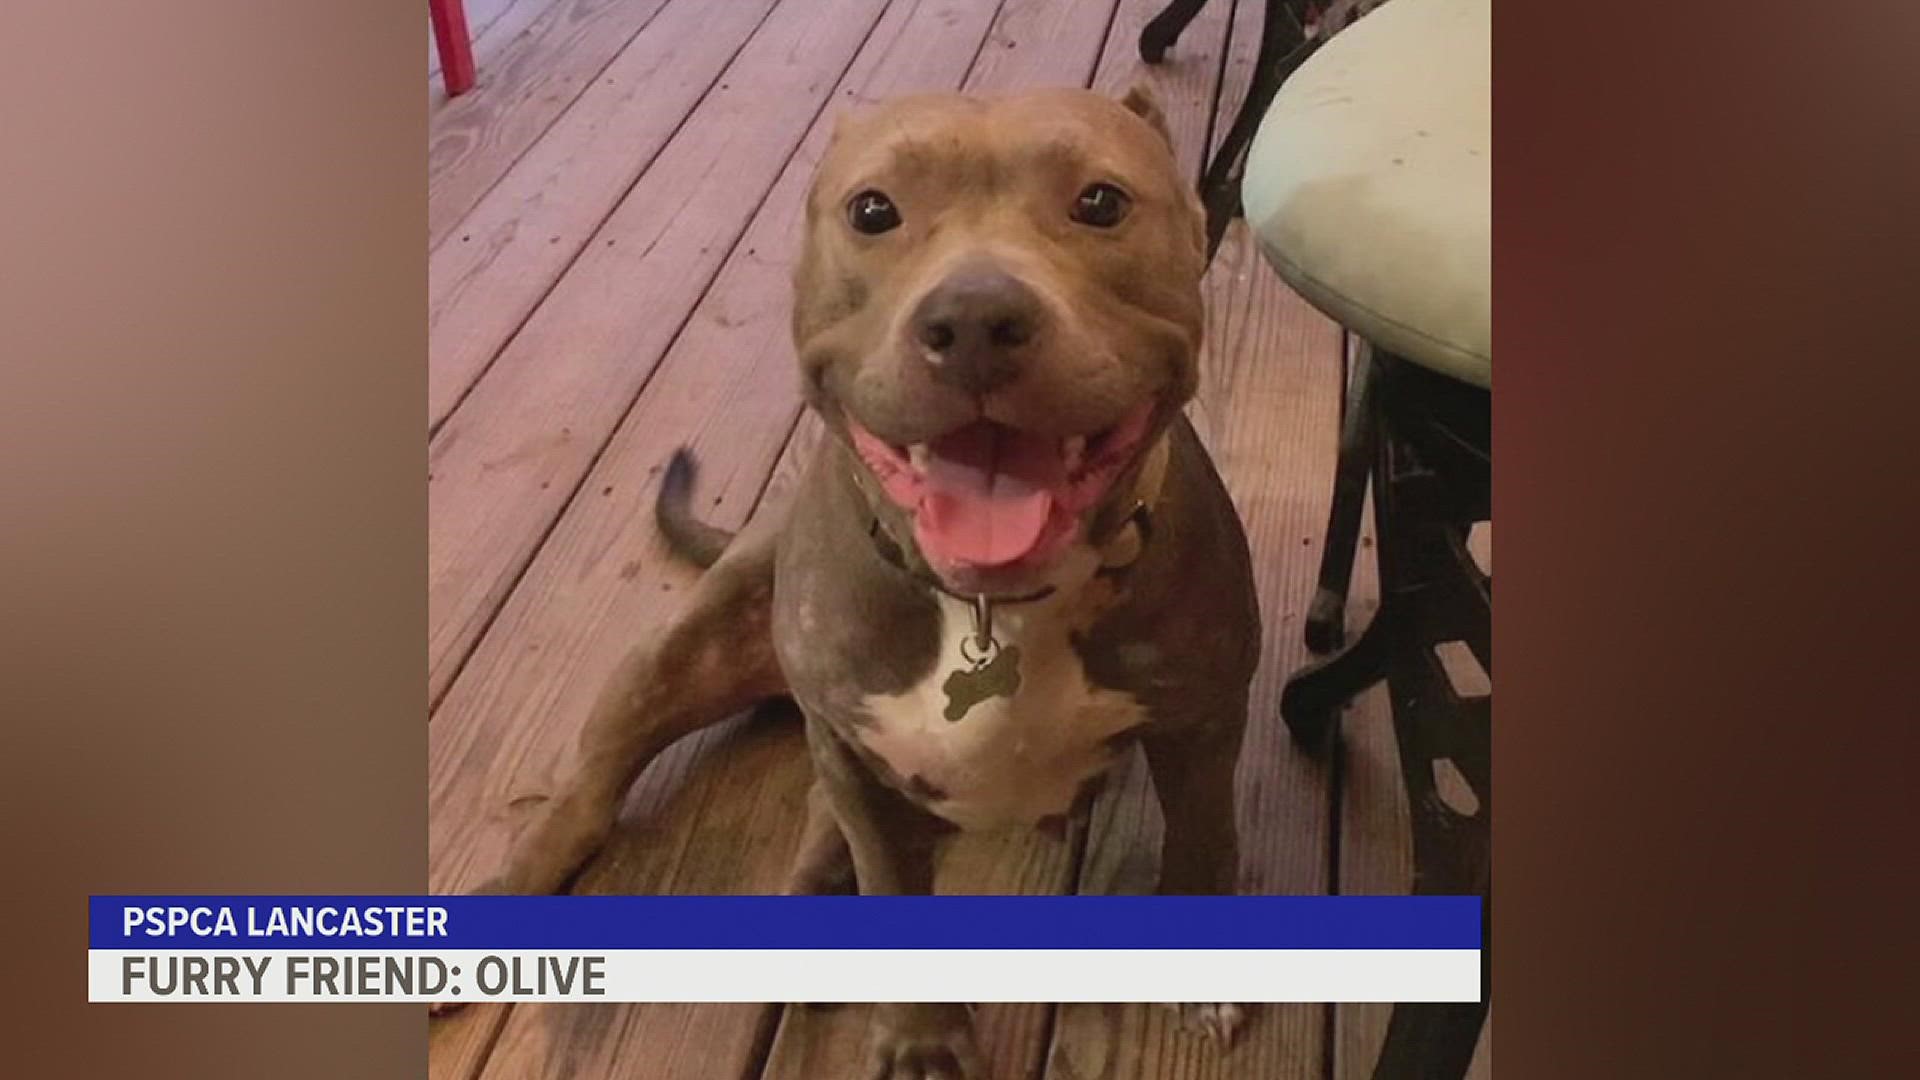 Olive is described as a cuddle bug with a sweet soul.